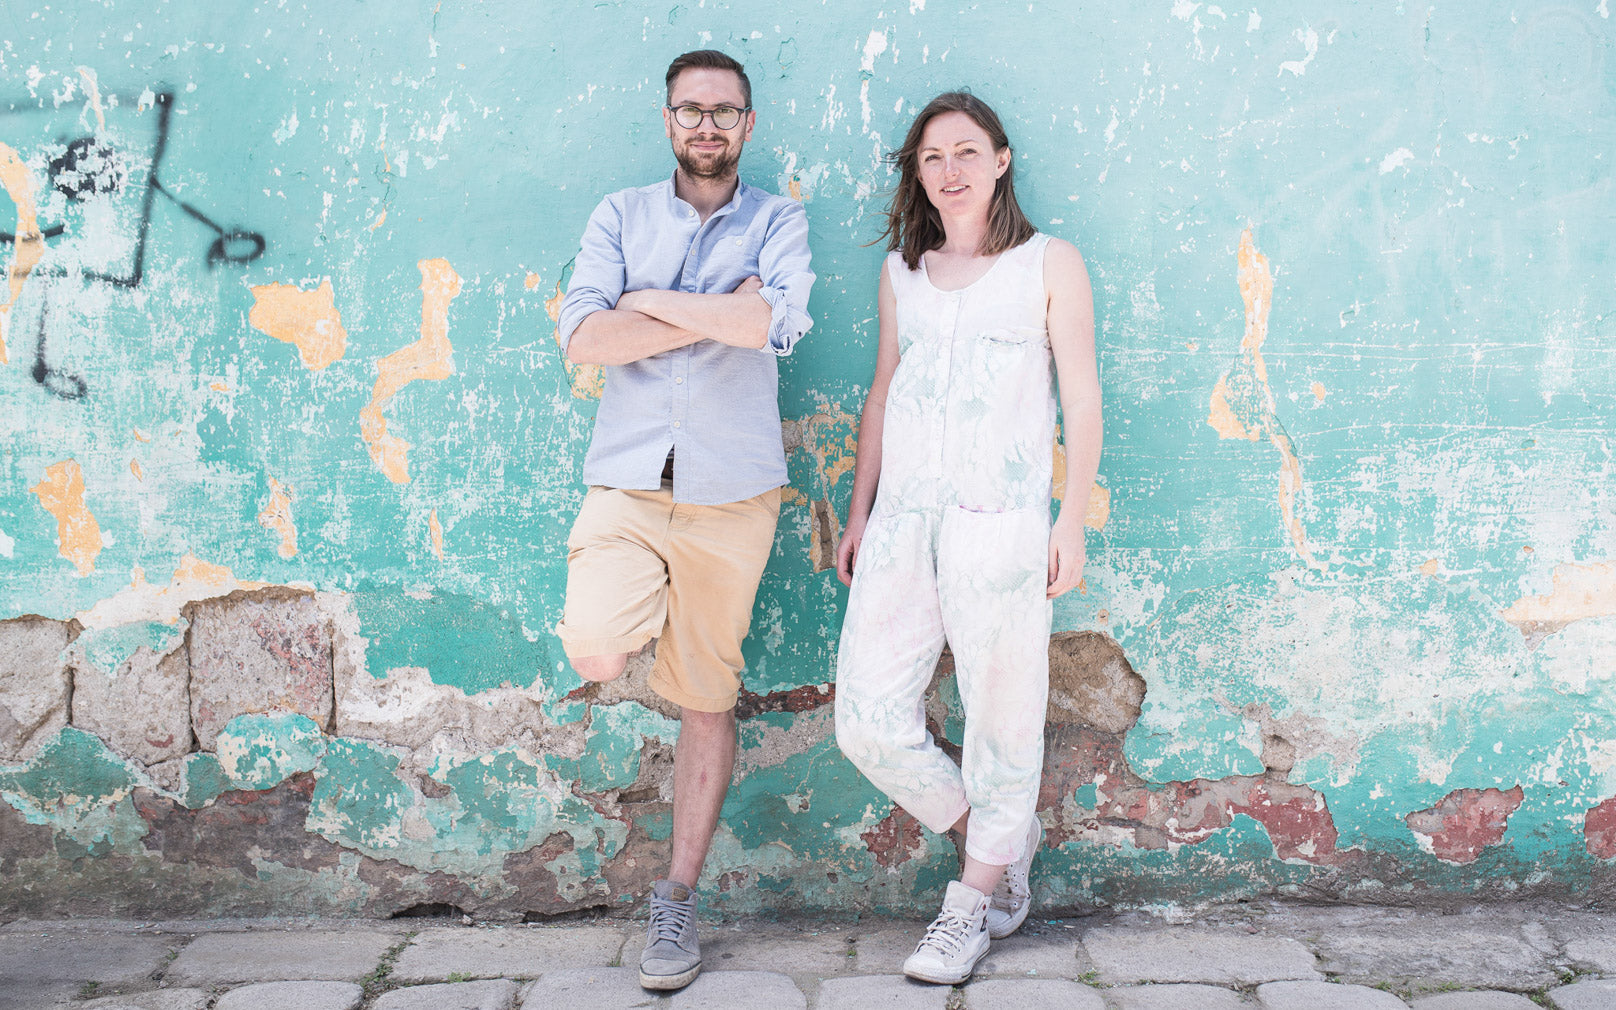 A Rum Fellow's founders Caroline Lindsell and Dylan O'Shea